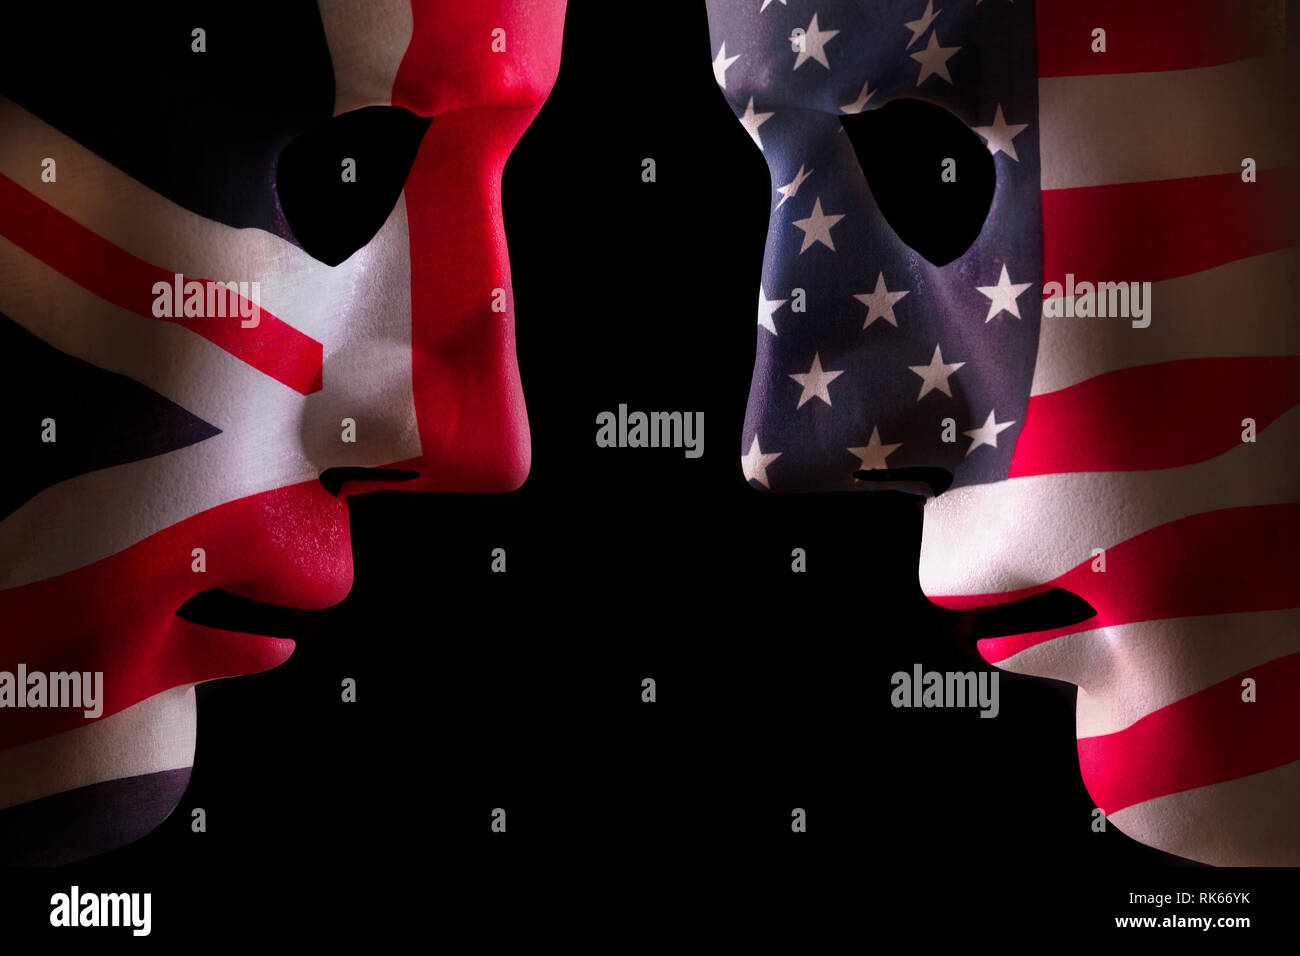 USA and GB face off head to head concept with human mask outlines covered in national flags symbols. Black background space for text Stock Photo